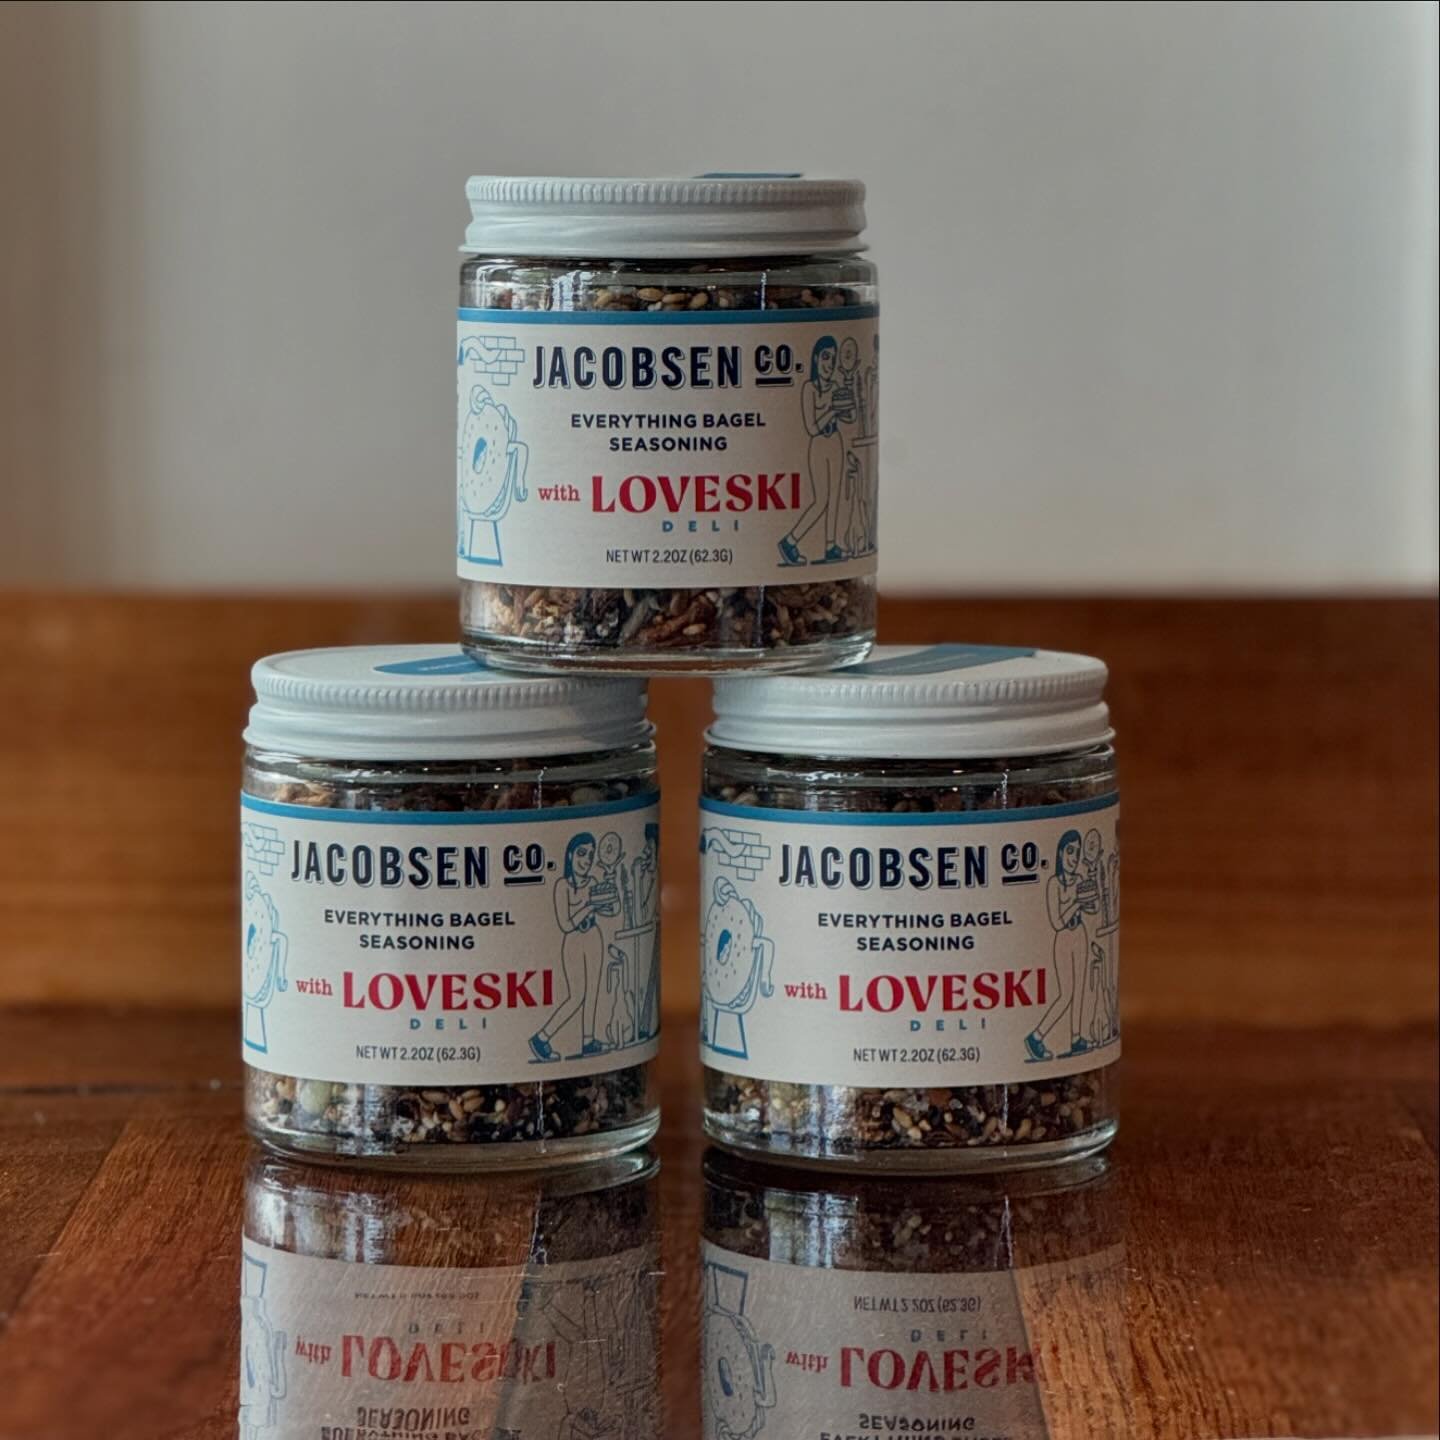 New product! Now carrying @jacobsensaltco @loveski.deli Everything Bagel seasoning! Perfect to sprinkle on morning toast or enjoy it in our new seasonal waffle @thecommoncupamity